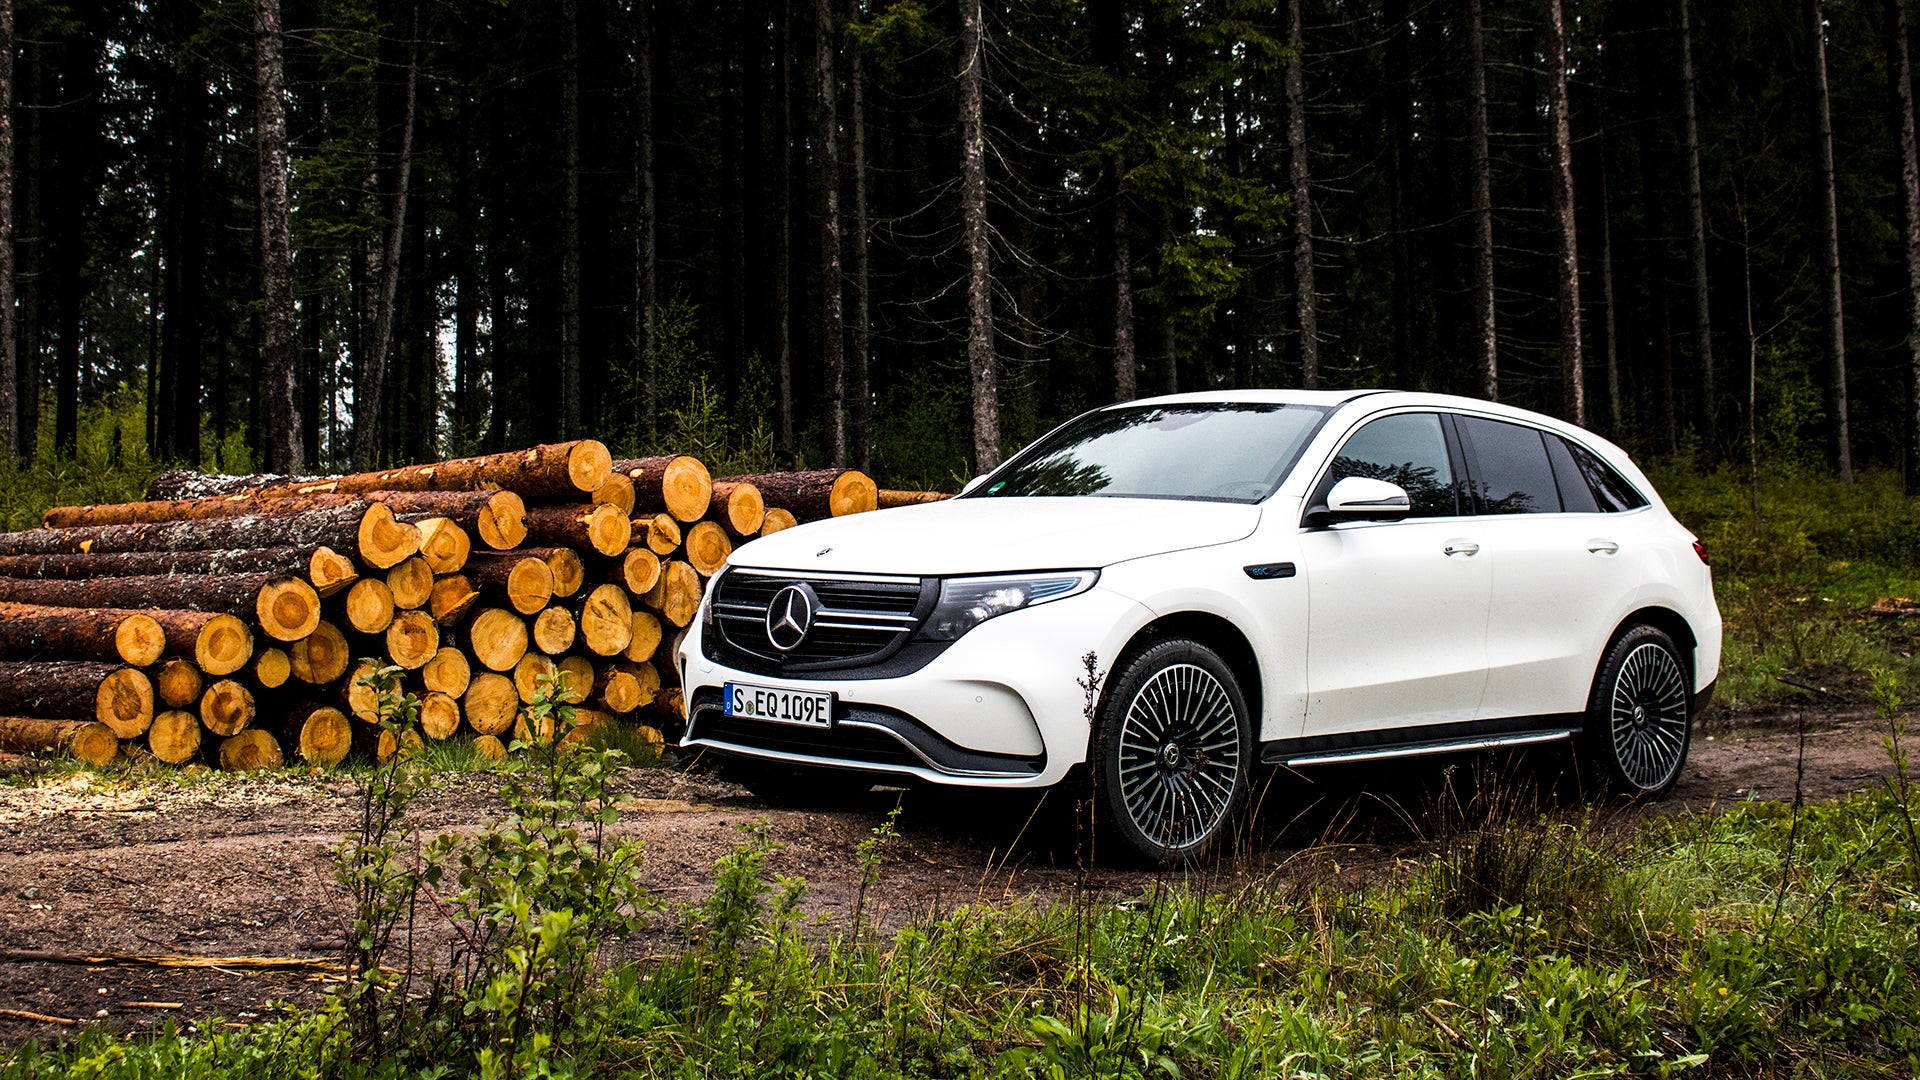 2020 Mercedes-Benz EQC 400 4Matic Review: The First Luxury Electric Car